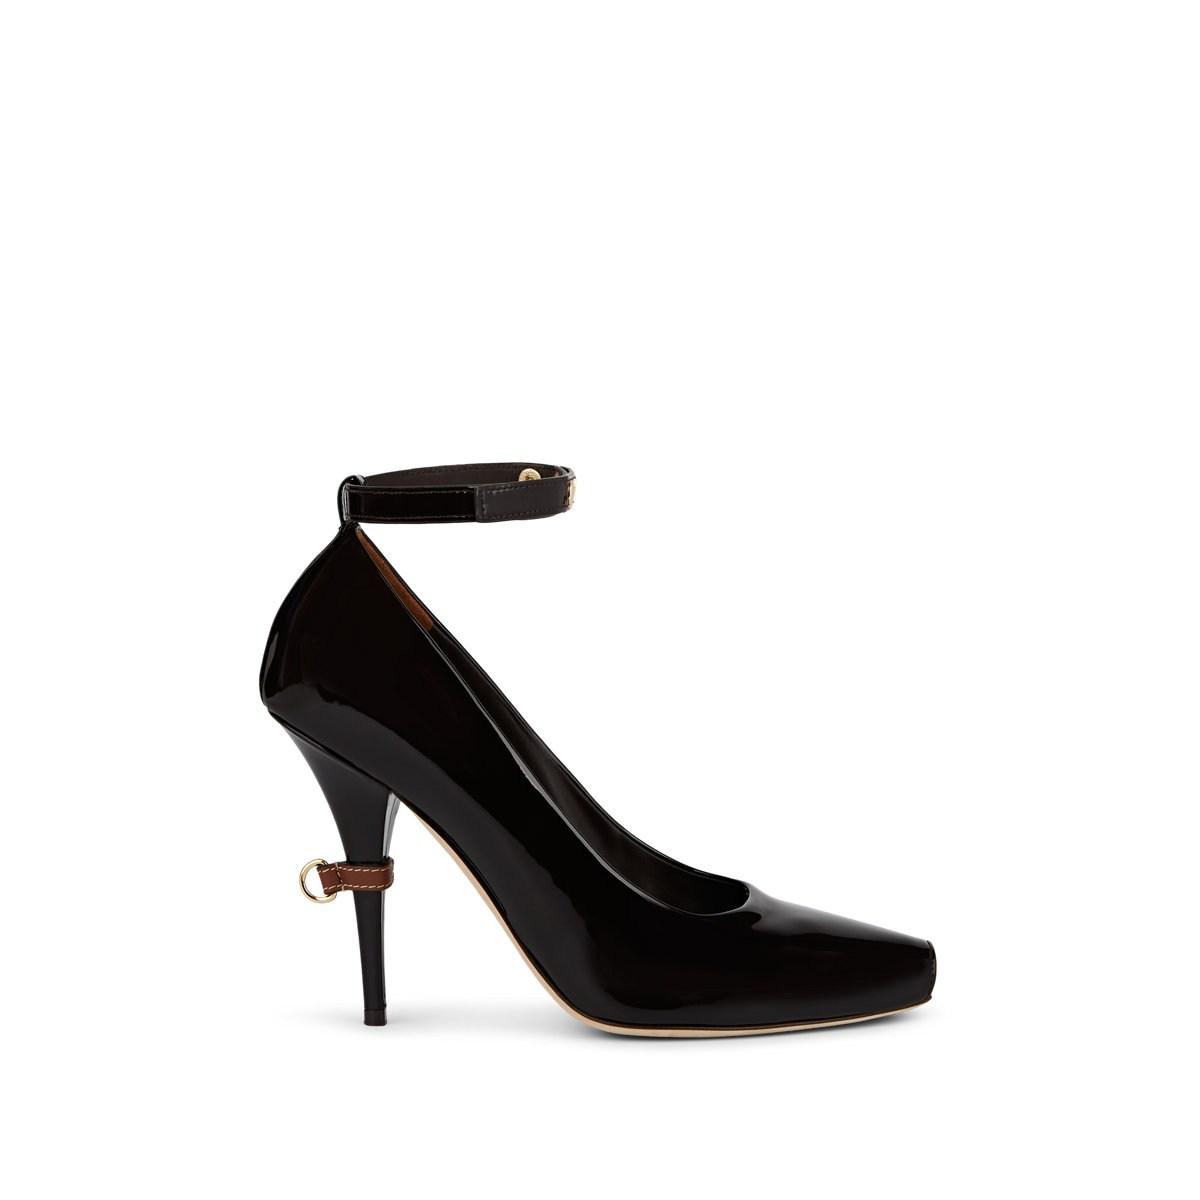 Burberry Aboxx Patent Leather Pumps in Black - Lyst